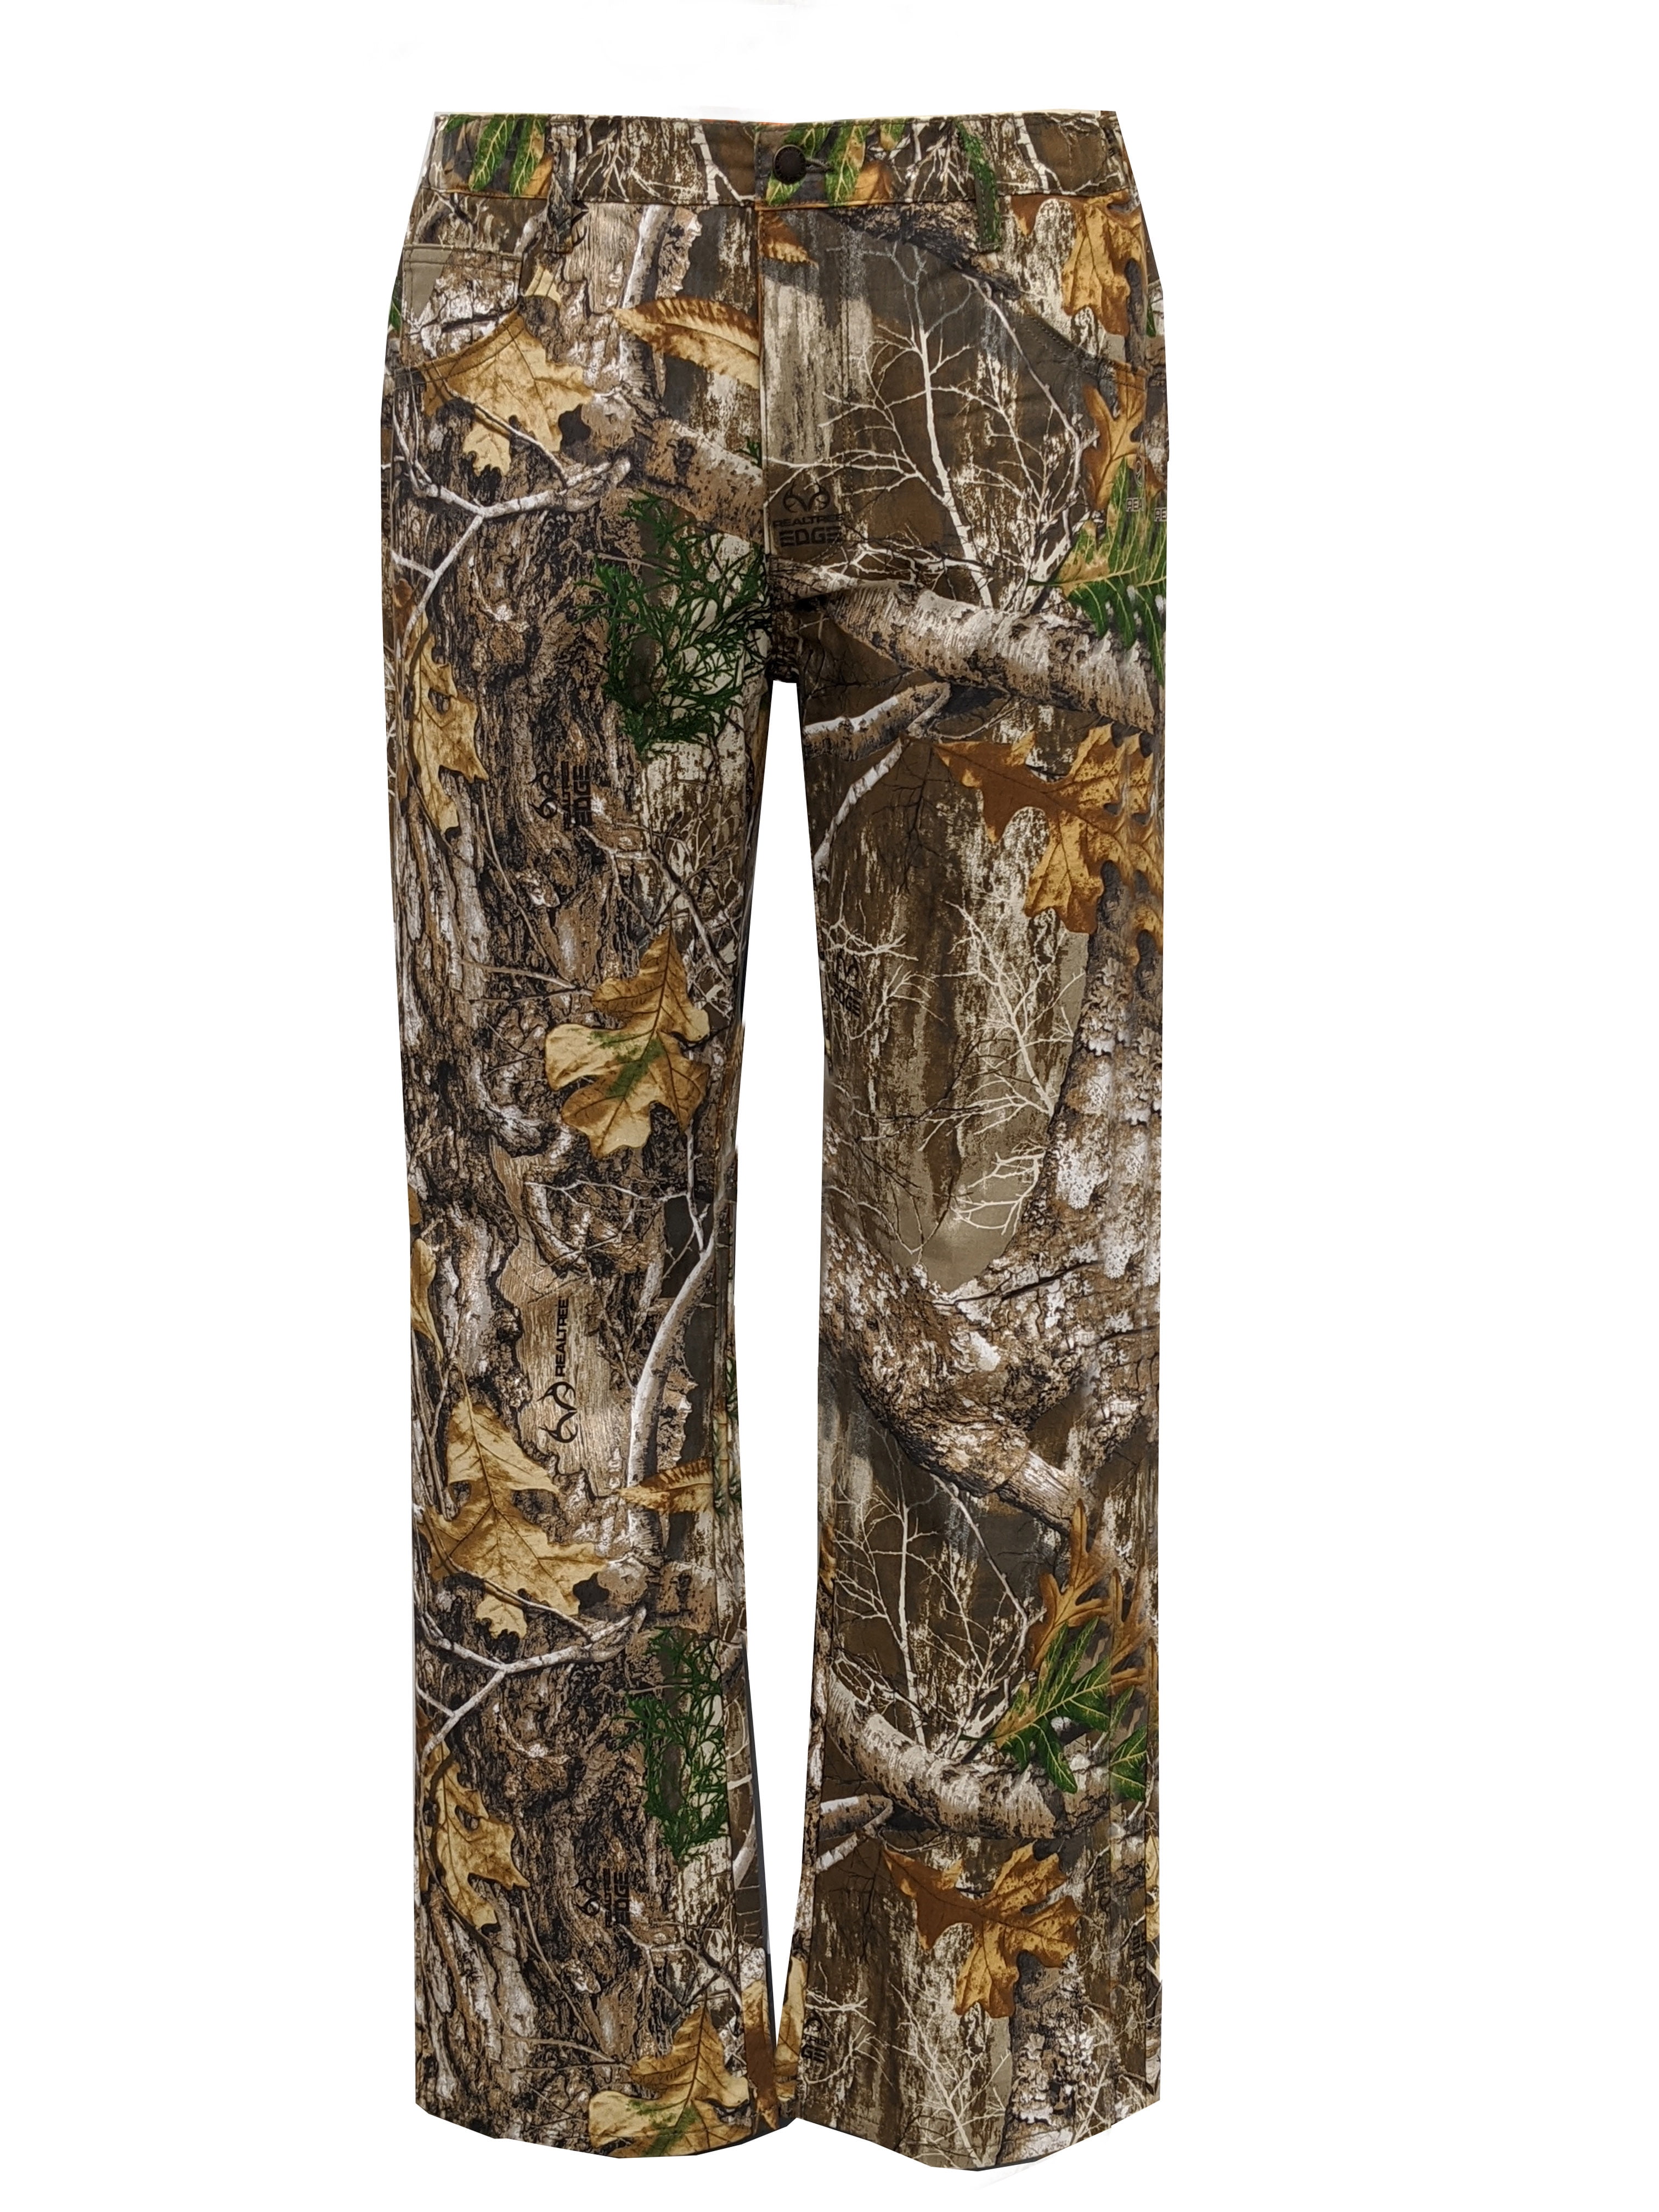 Realtree Camo Relaxed Fit Bootcut Flex Pant for Men (5 Pack